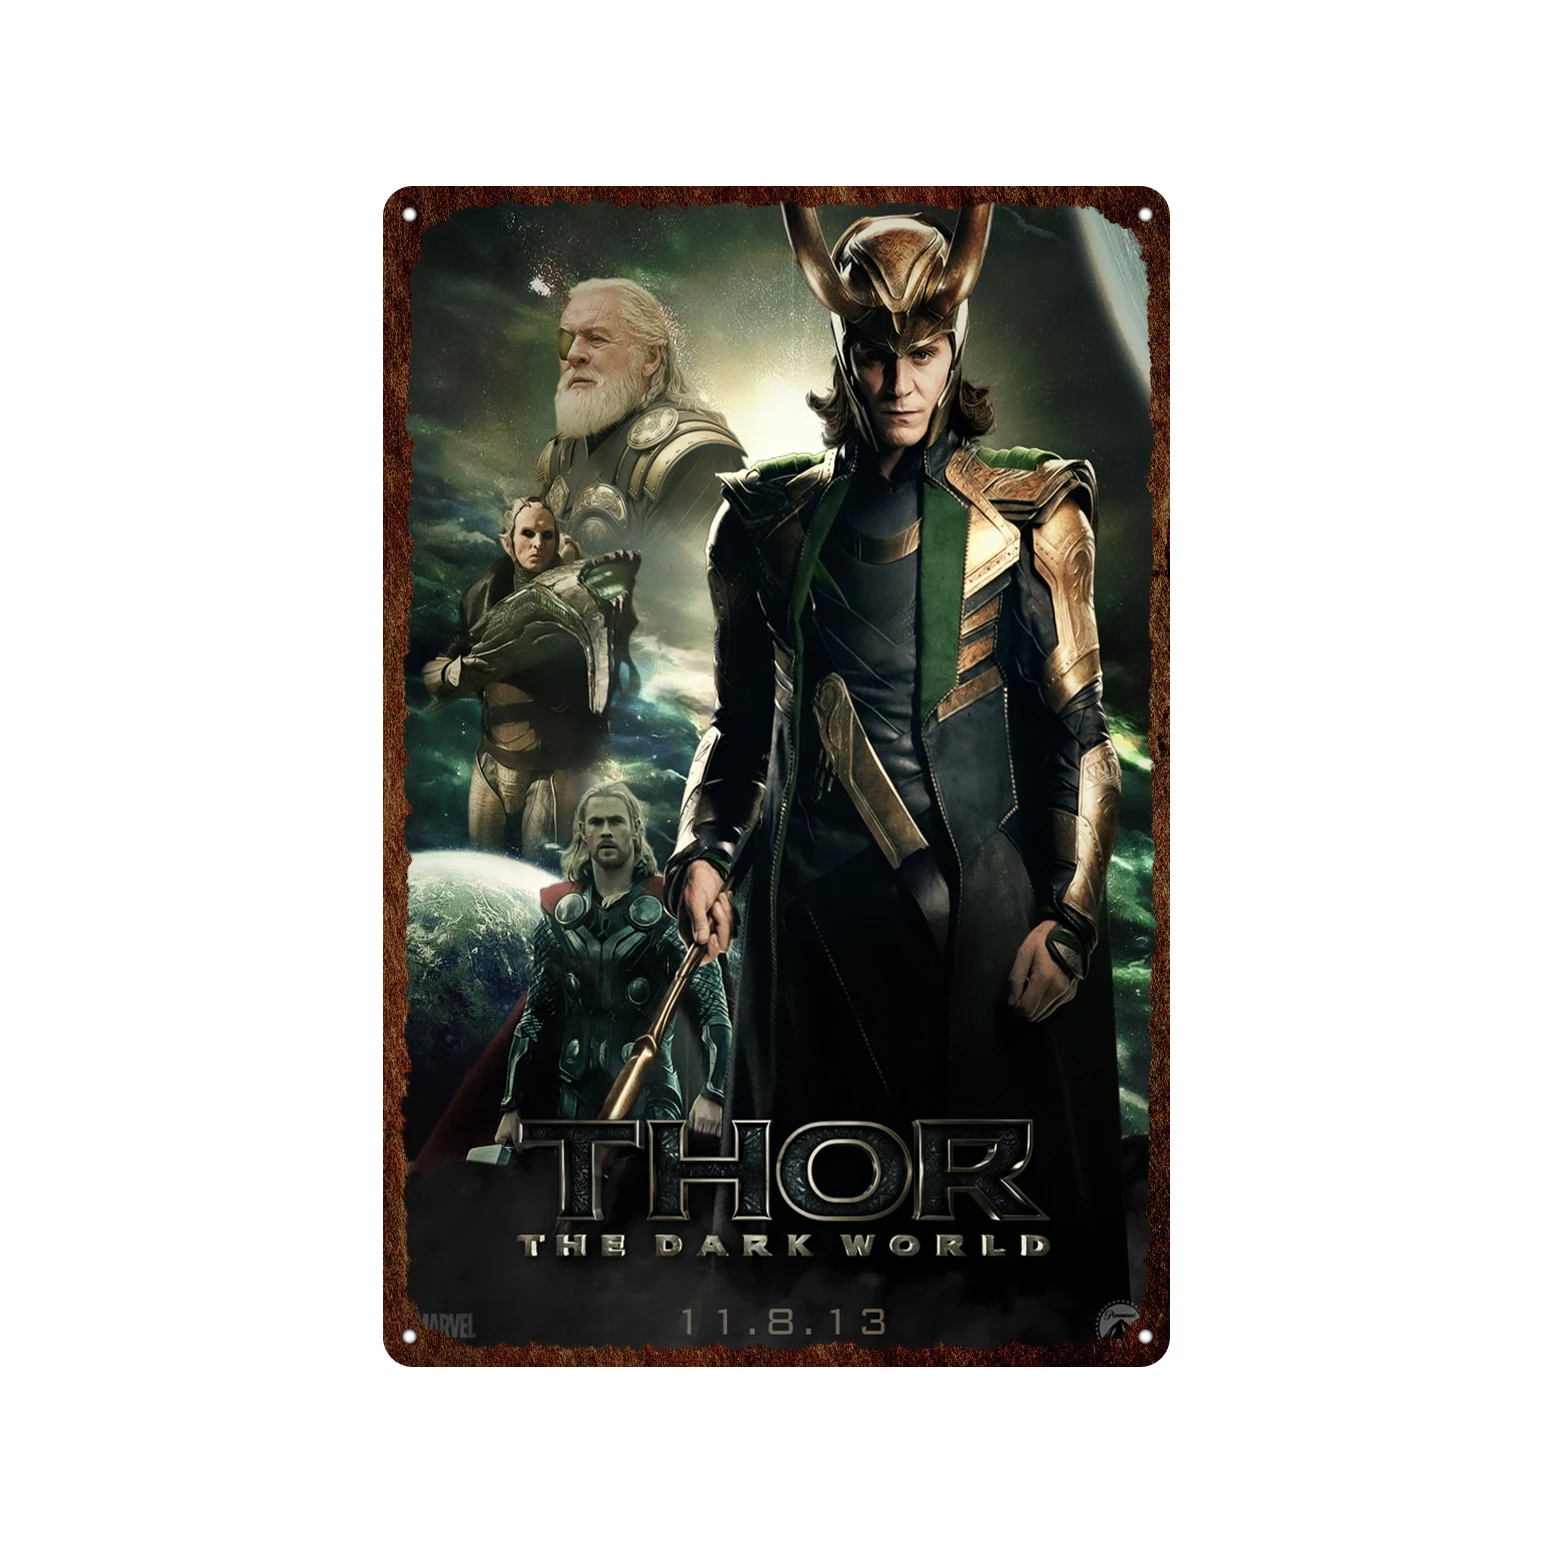 

Thor Ragnarok Tin Poster Plate Vintage Metal Retro Classical Movie Poster Plaque Wall Art Decorative Tin Sign Poster